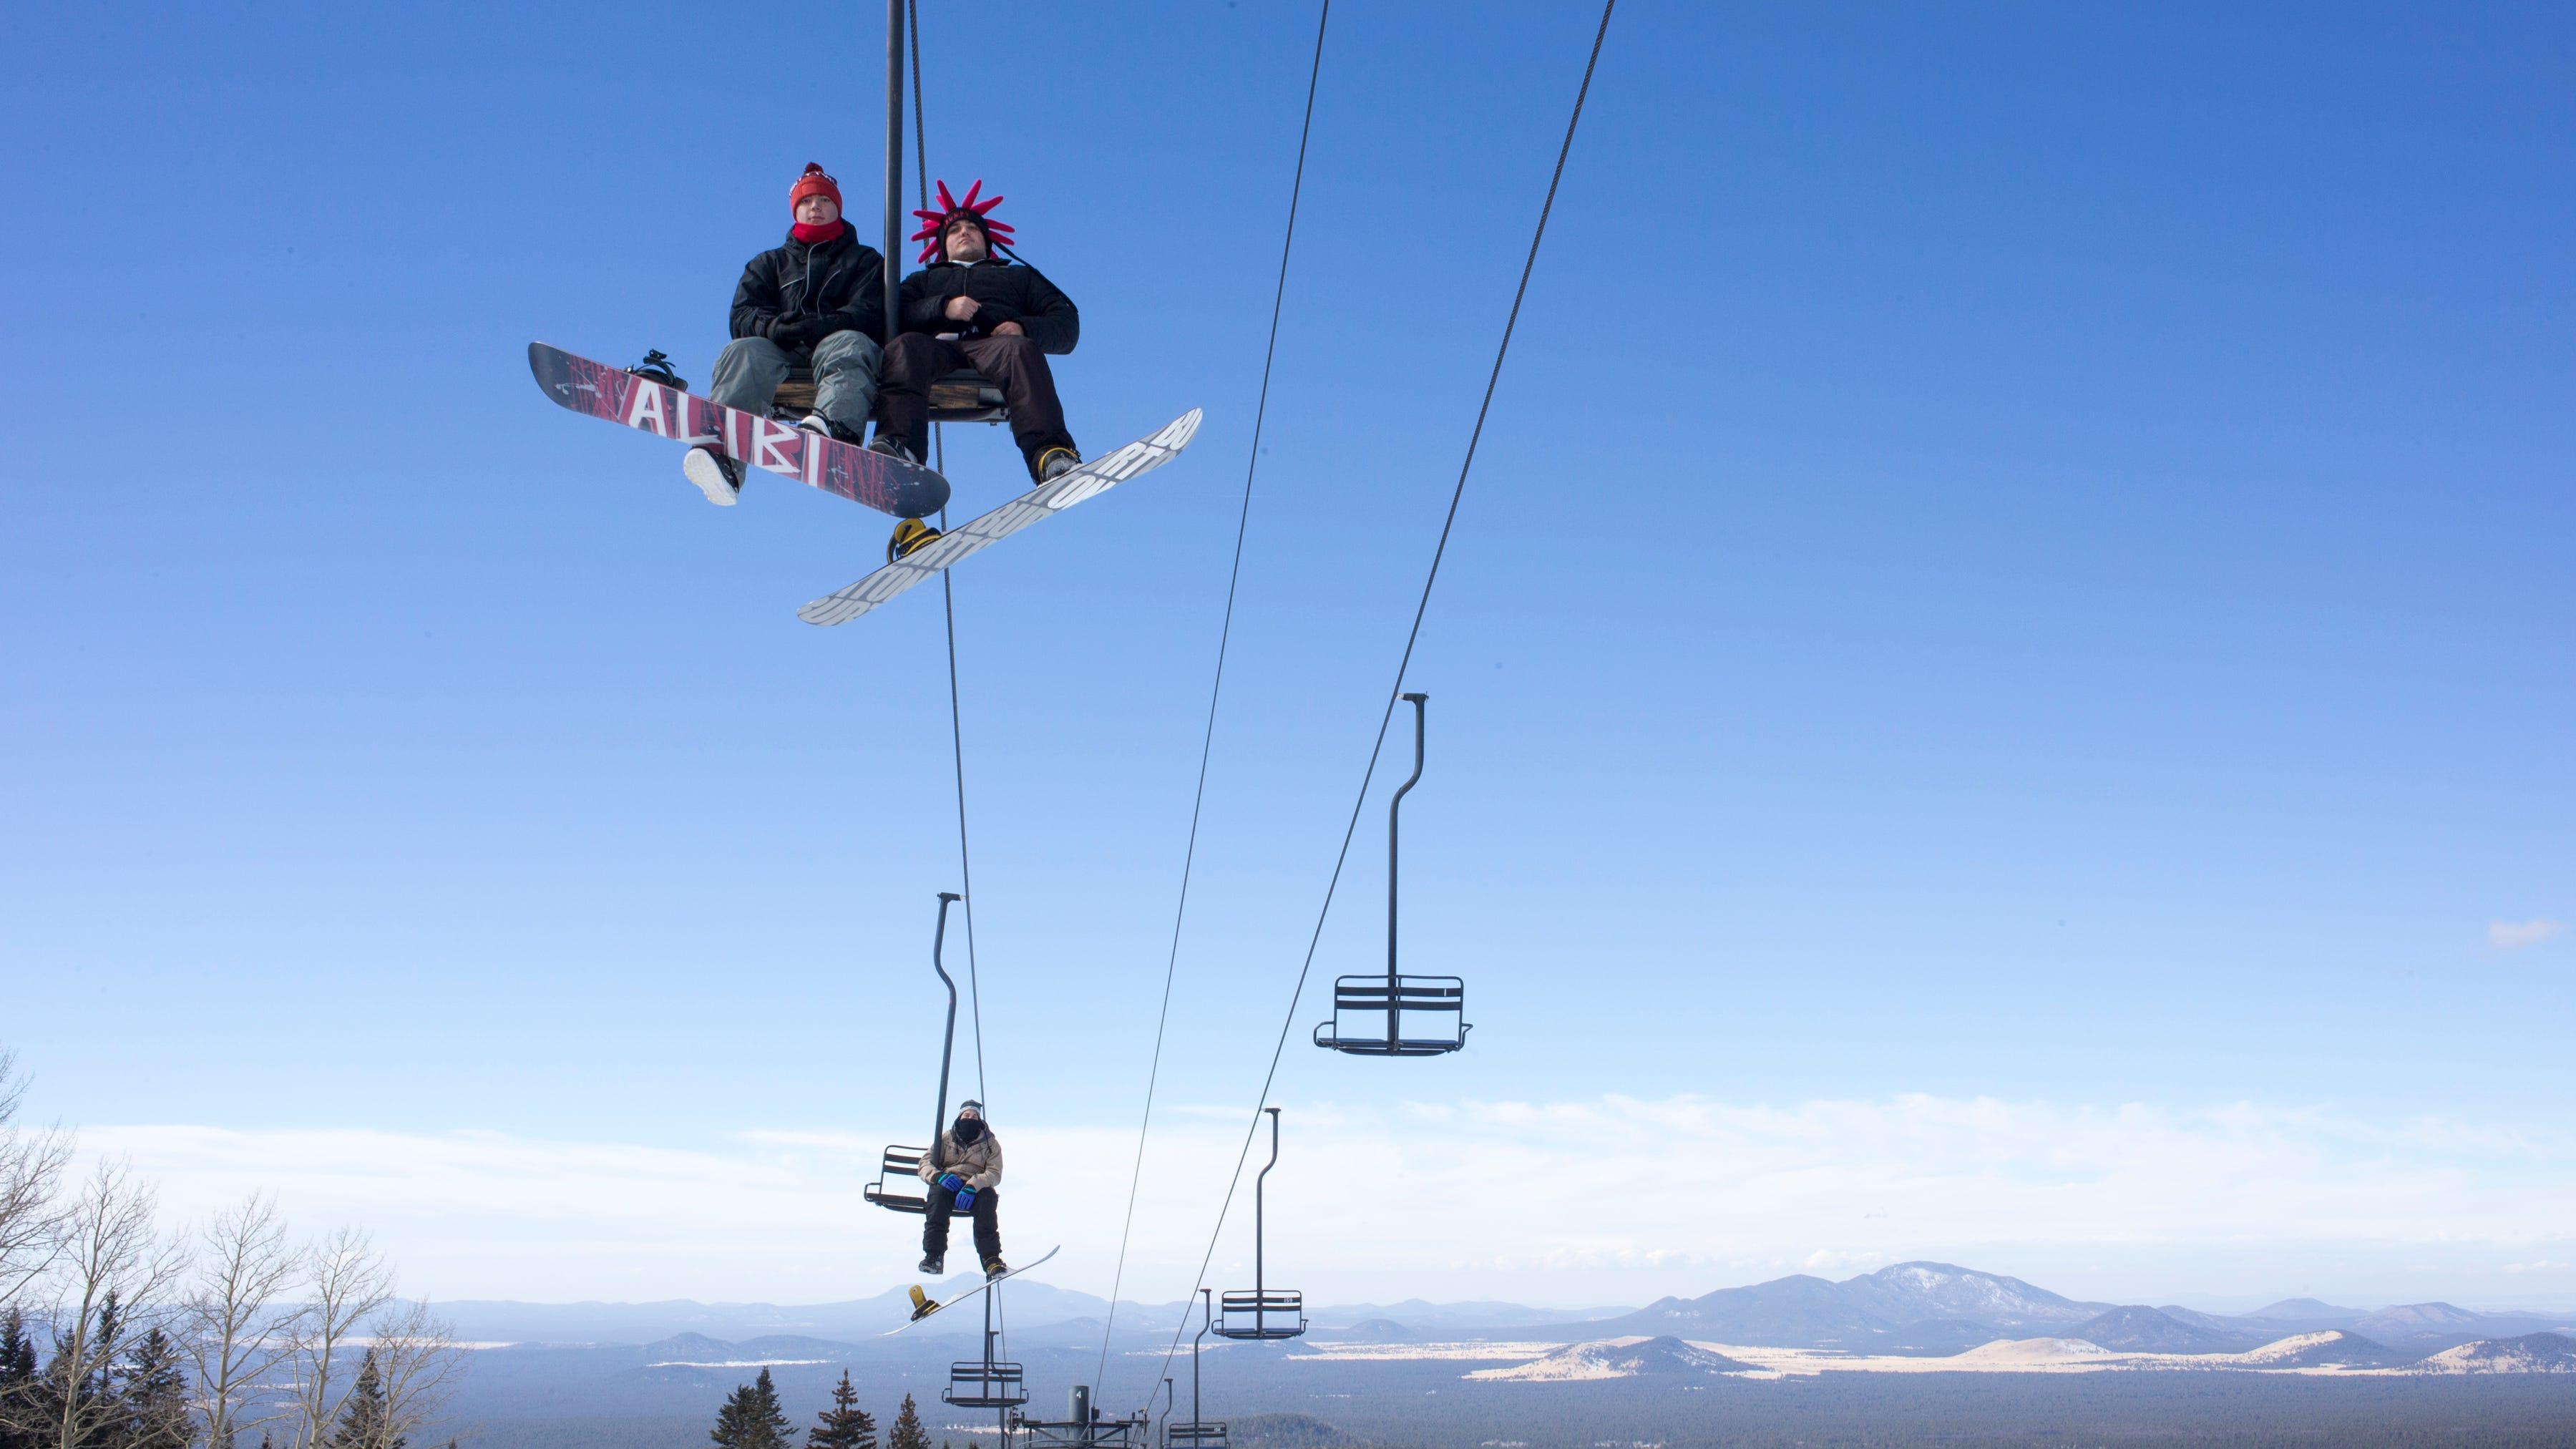 Snowboarders ride the ski lift at Snowbowl last December. The resort near Flagstaff has been acquired by an investor.